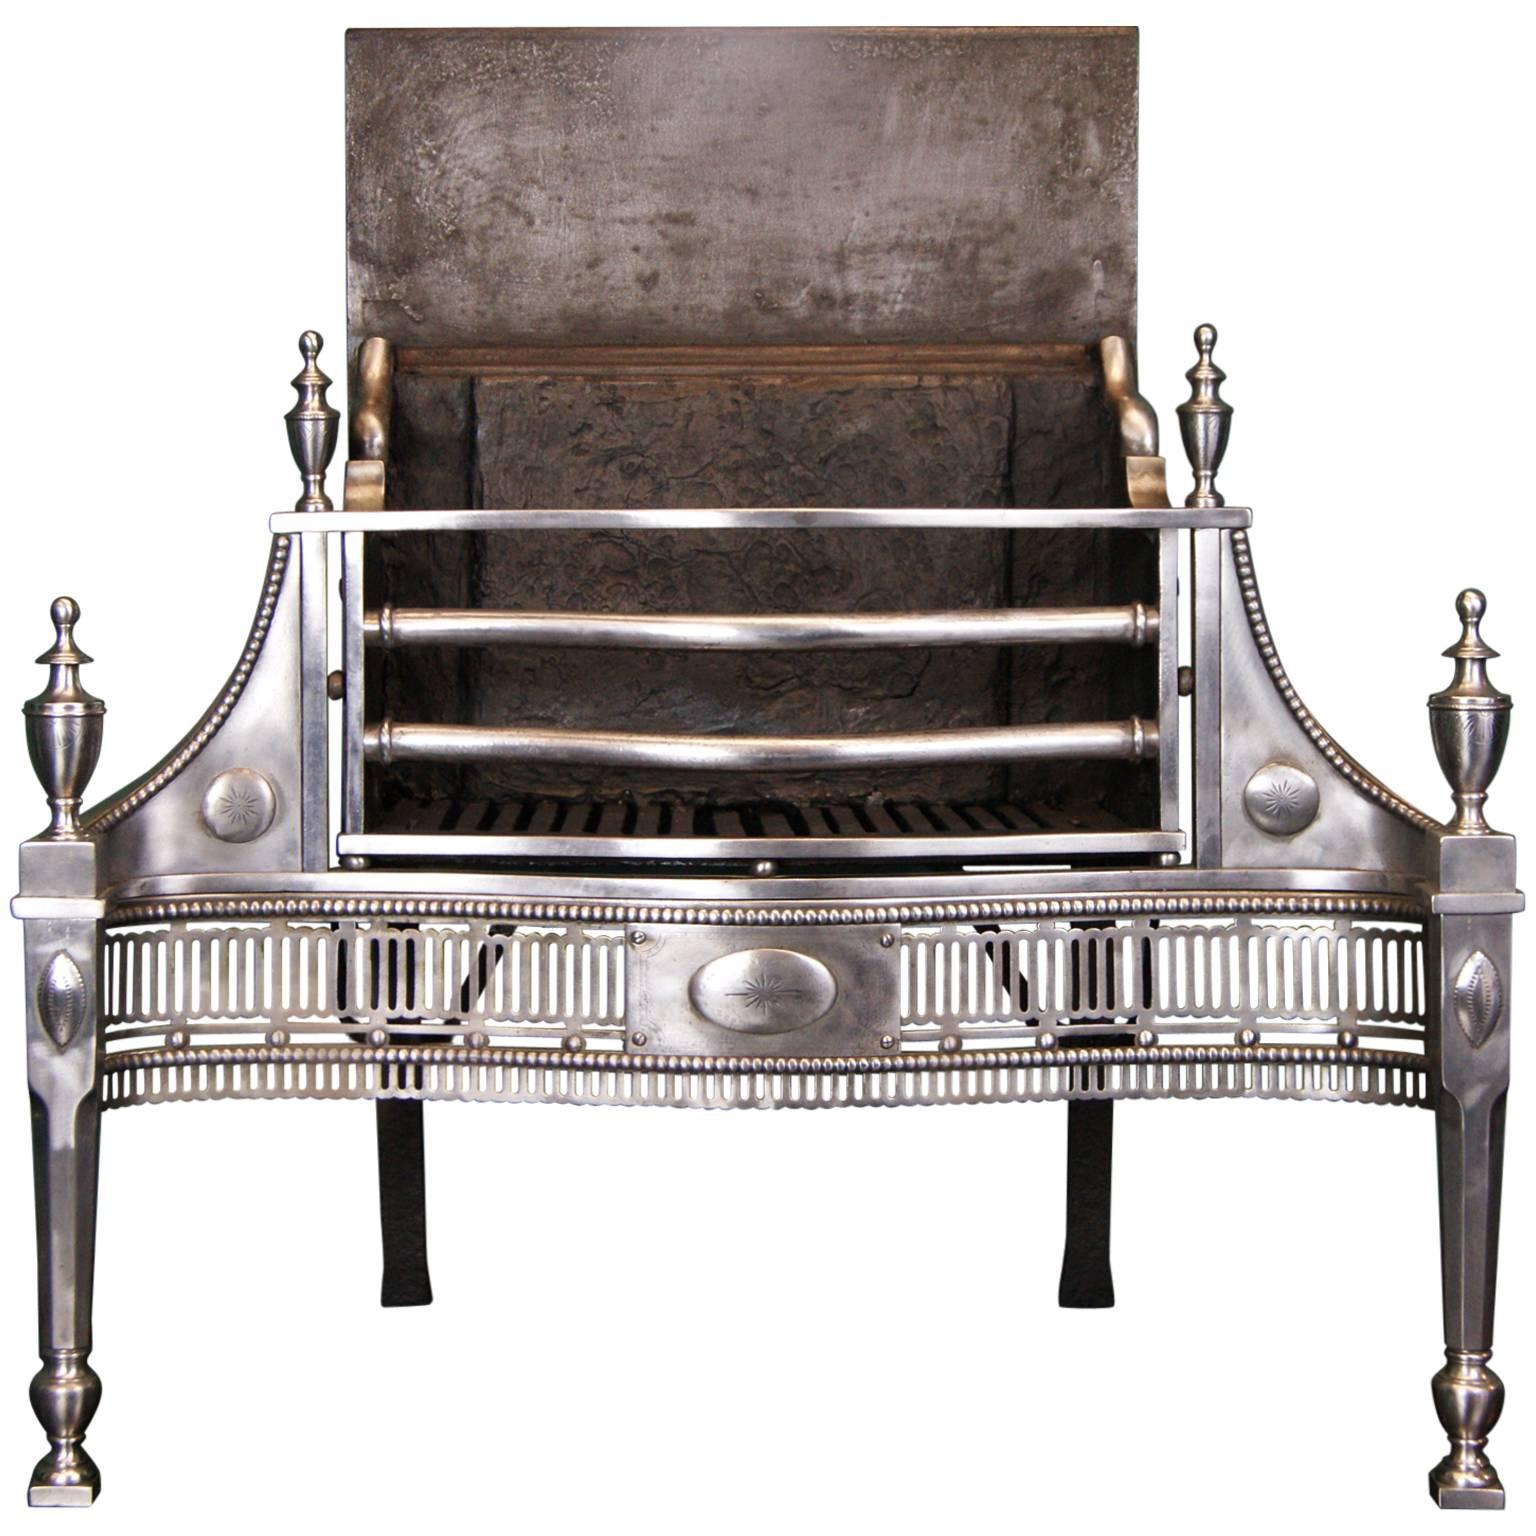 Polished Steel George III Freestanding Fireplace Fire Grate For Sale